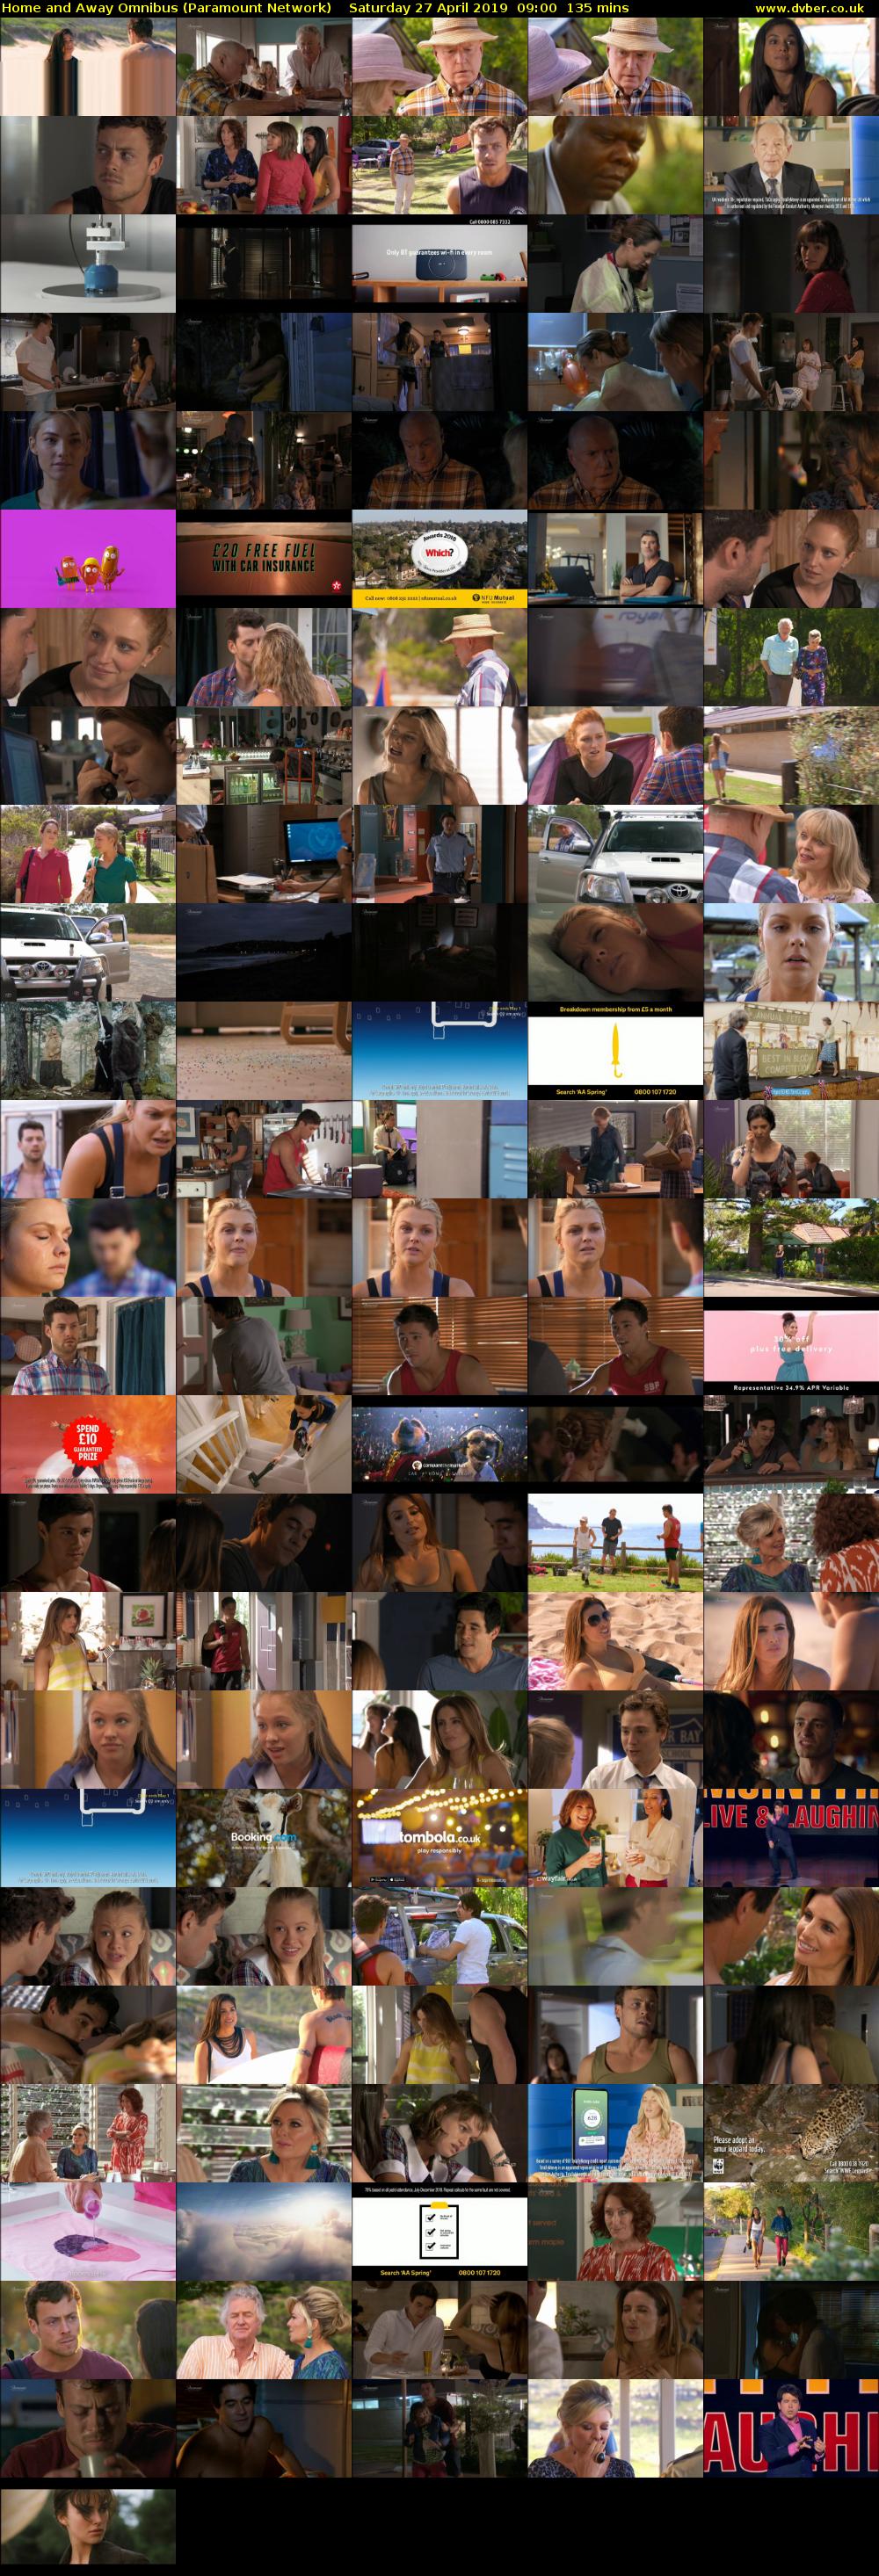 Home and Away Omnibus (Paramount Network) Saturday 27 April 2019 09:00 - 11:15